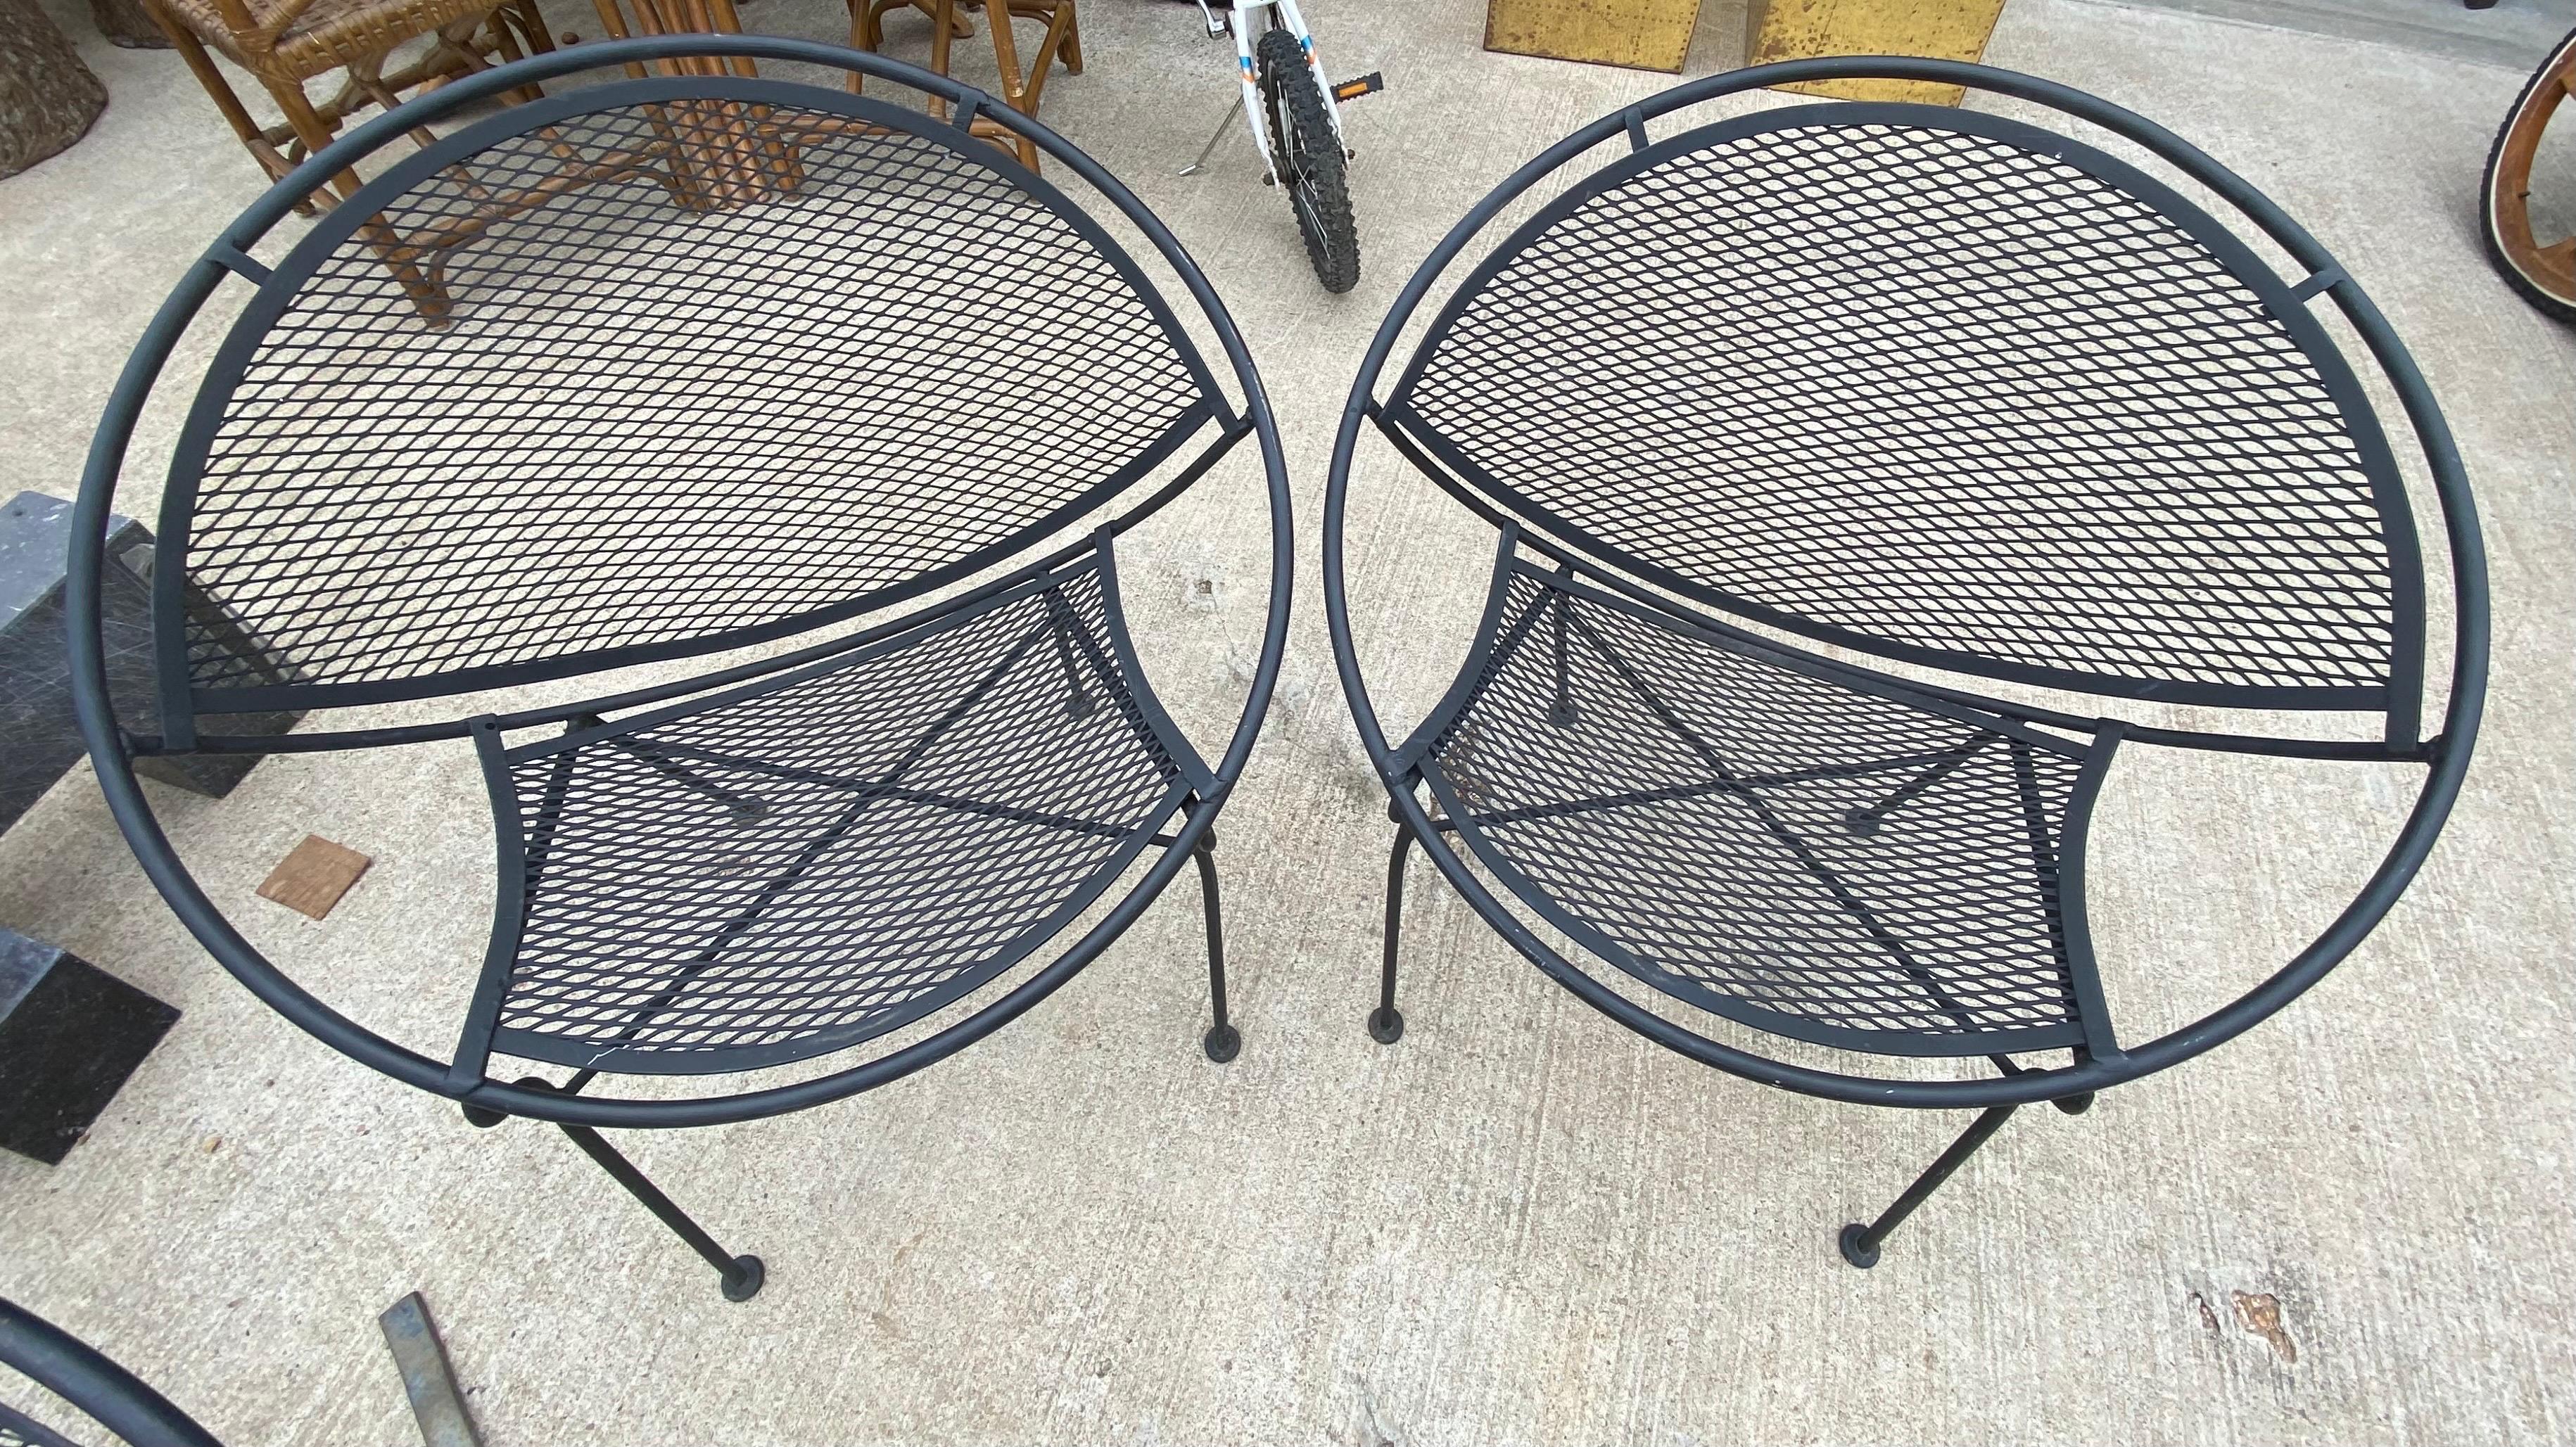 Mid-Century Modern John Salterini 'Radar' outdoor patio set consisting of (2) chairs, (2) rocking chairs, (1) tandem seating, (1) chaise lounge, (1) nesting tables made of metal mesh and wrought iron, totaling to 7 pieces. Age-appropriate wear on